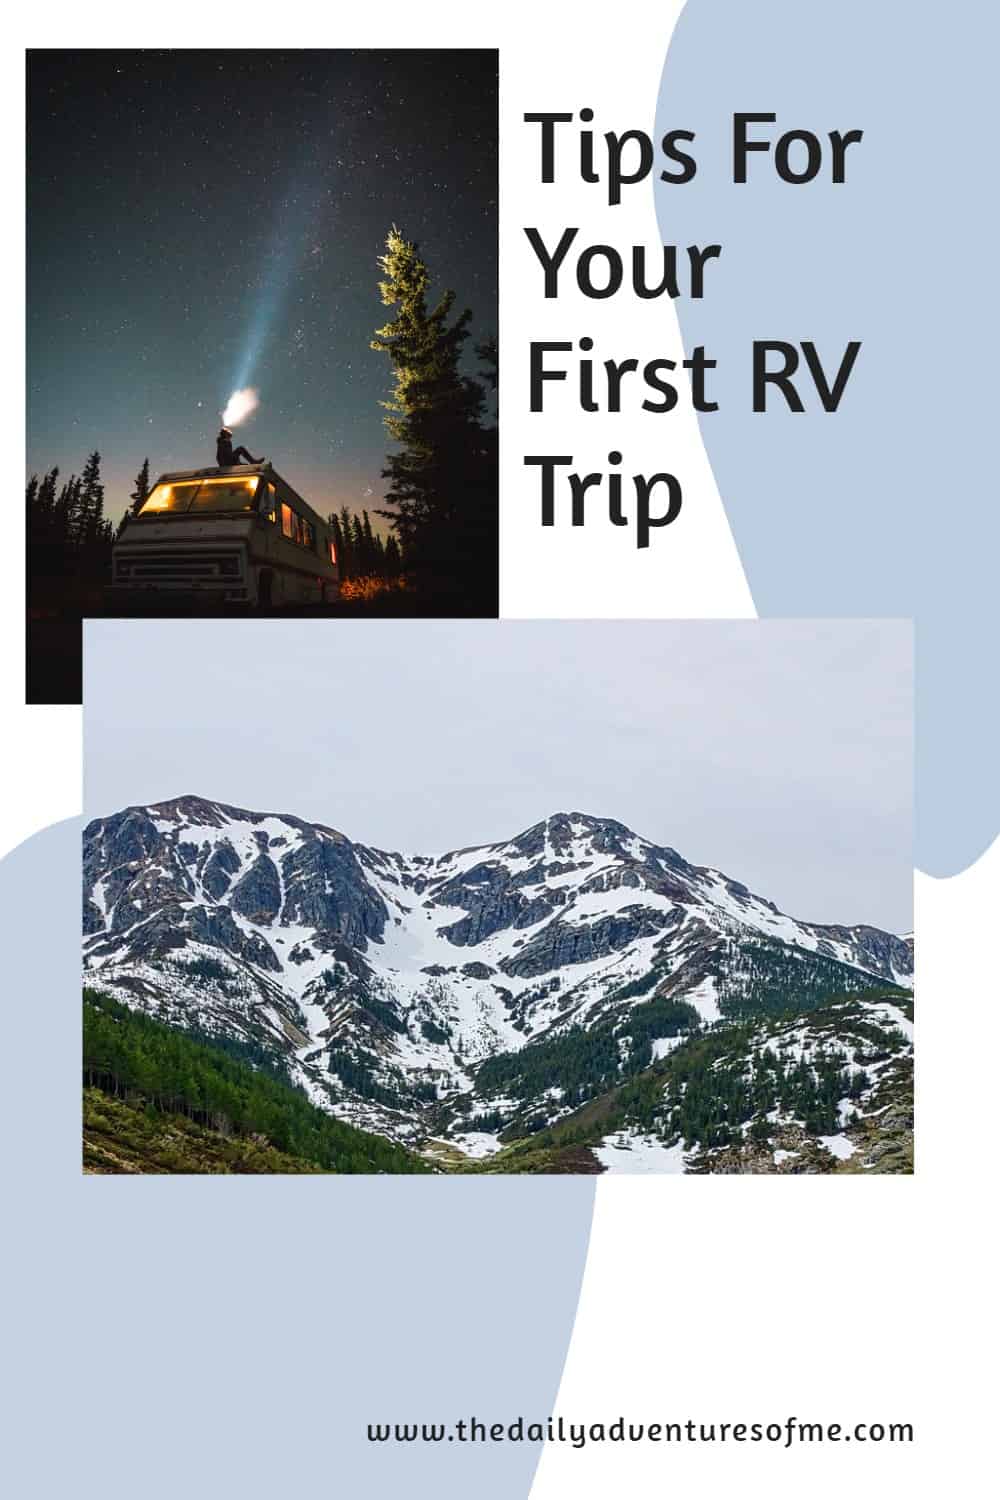 Read on for printable checklists to help your RV trip go flawlessly. #rvlife #rvtravel #roadtrips #UStravel